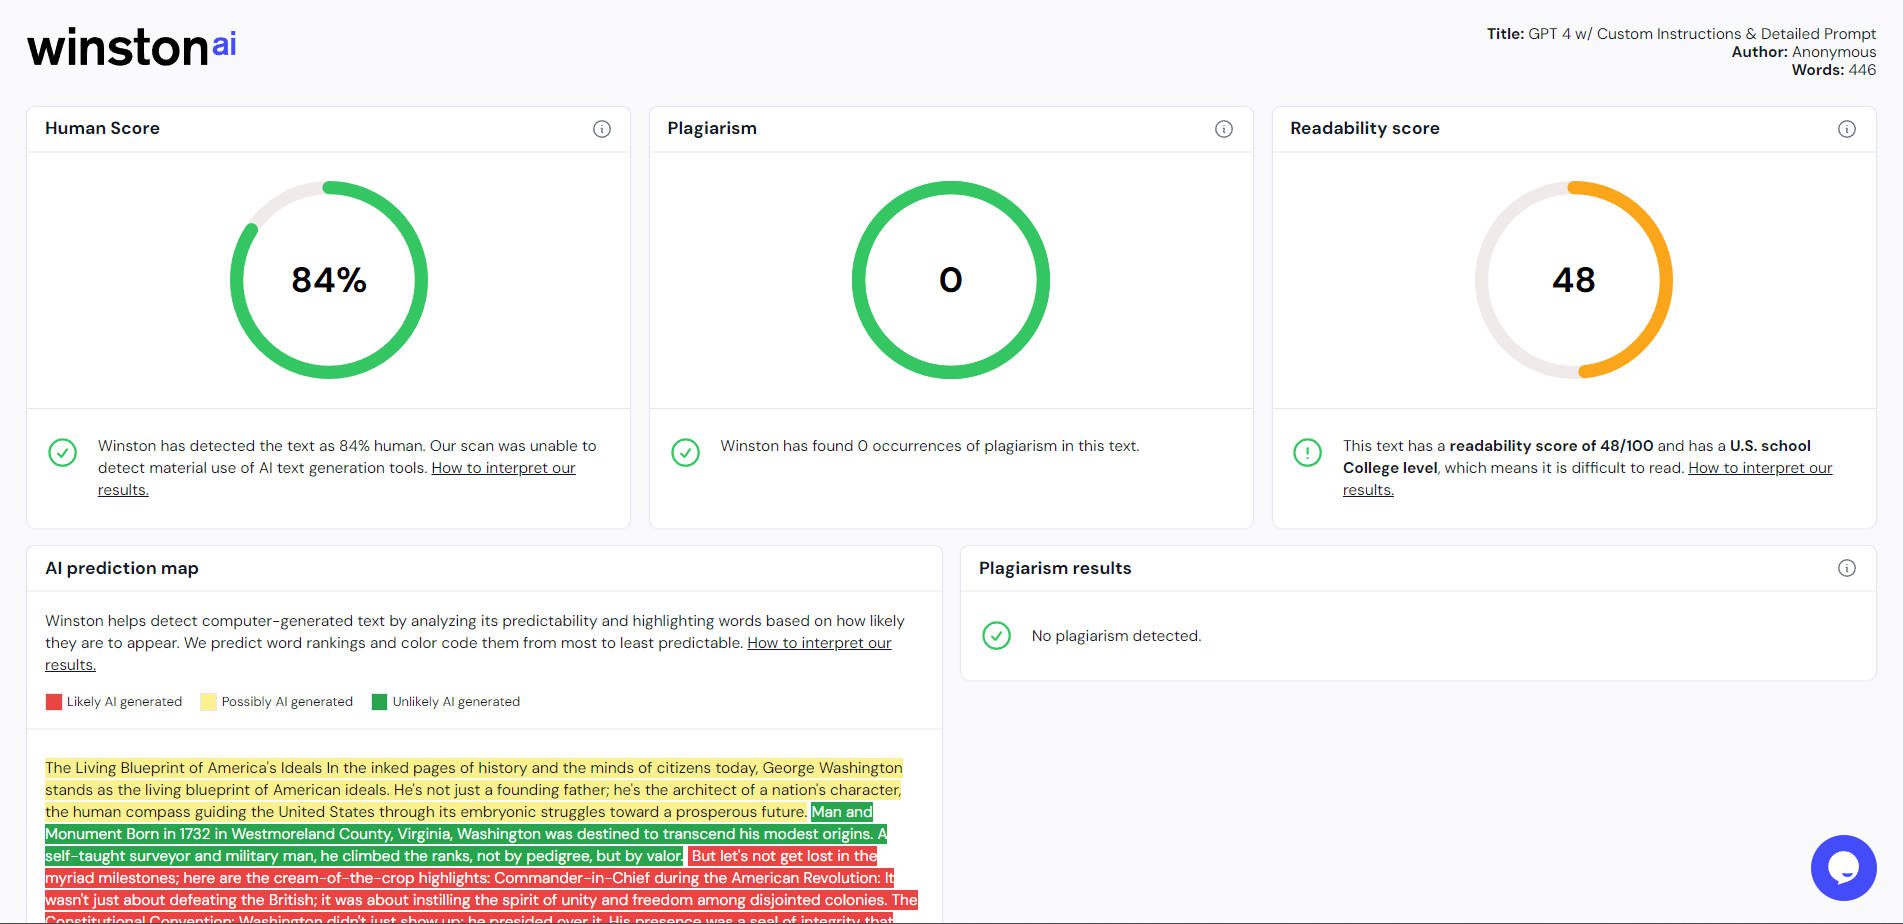 Sharable Content Detection and Plagiarism Reports to Non-Users